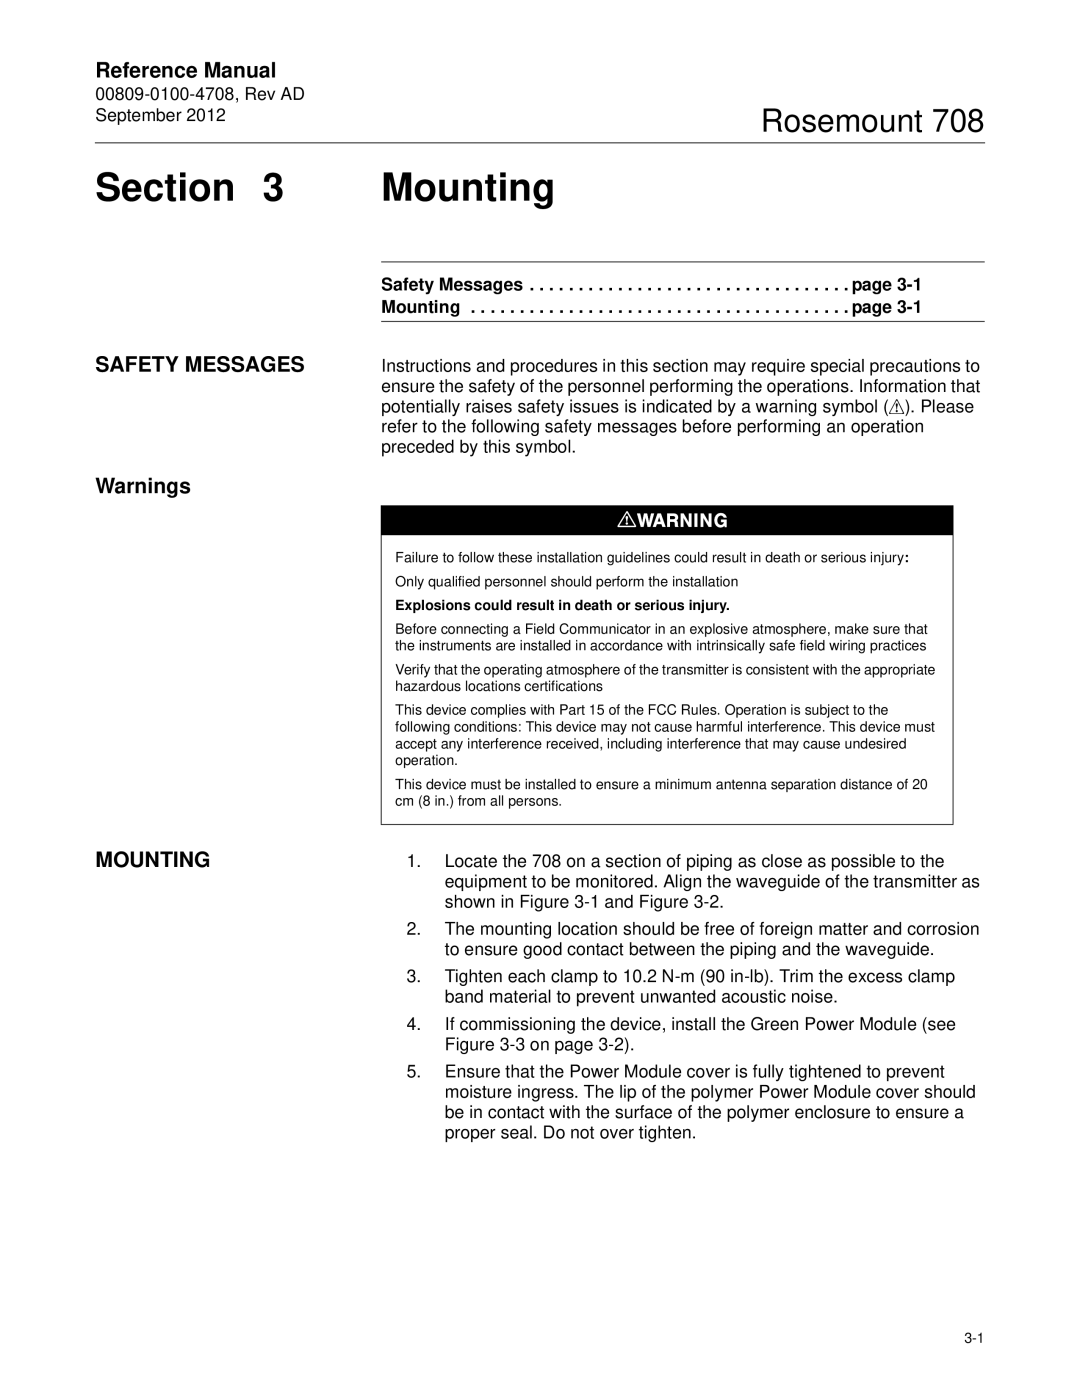 Emerson 708 manual Section, Mounting 